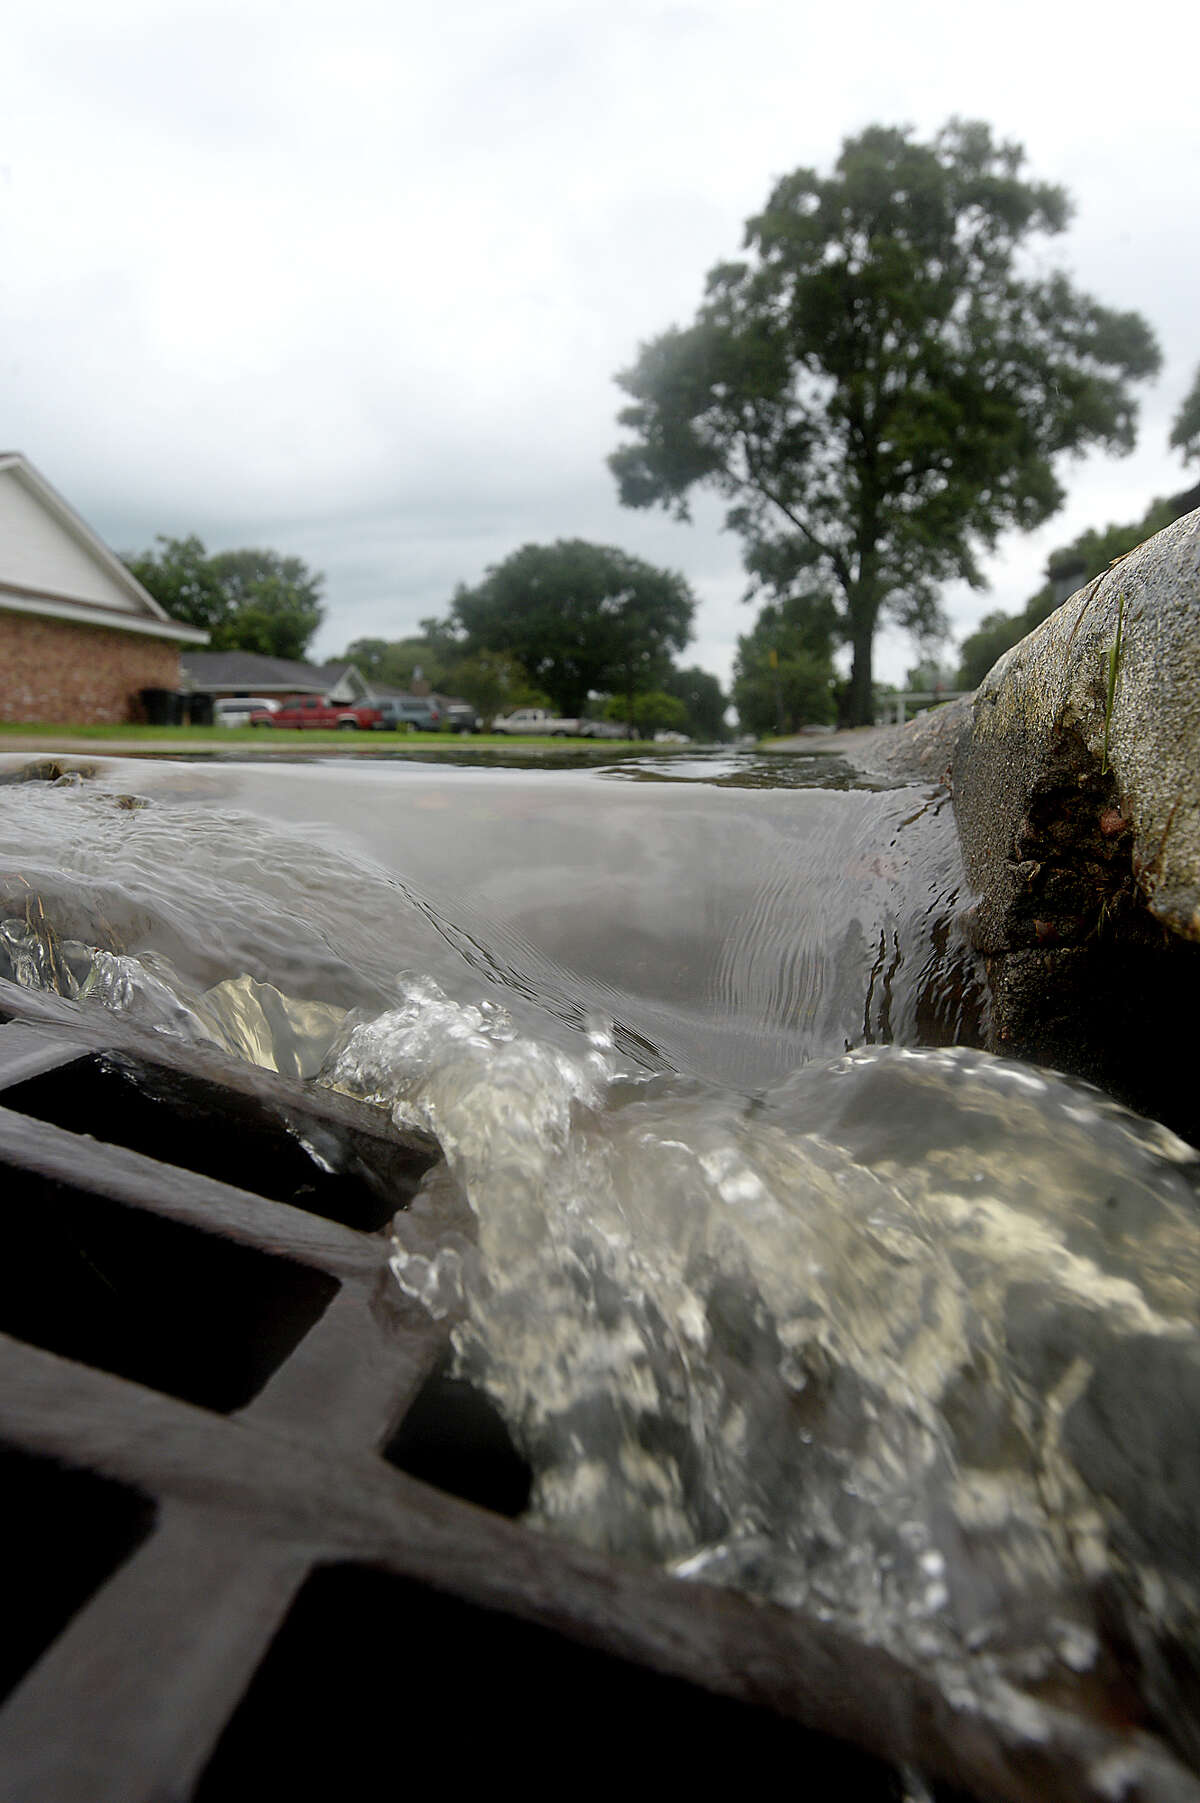 Water pours into a storm drain on 31st Street in Nederland as spotty bursts of rain move through the area Saturday, briefly accumulating on streets near Nederland Avenue, which is prone to flooding in heavy rainfalls. Heavier rains and wind from the outer bands of Hurricane Harvey, which was downgraded to a tropical storm, are expected to impact the Southeast Texas region within the coming days, increasing the risk for severe flooding. Photo taken Saturday, August 26, 2017 Kim Brent/The Enterprise